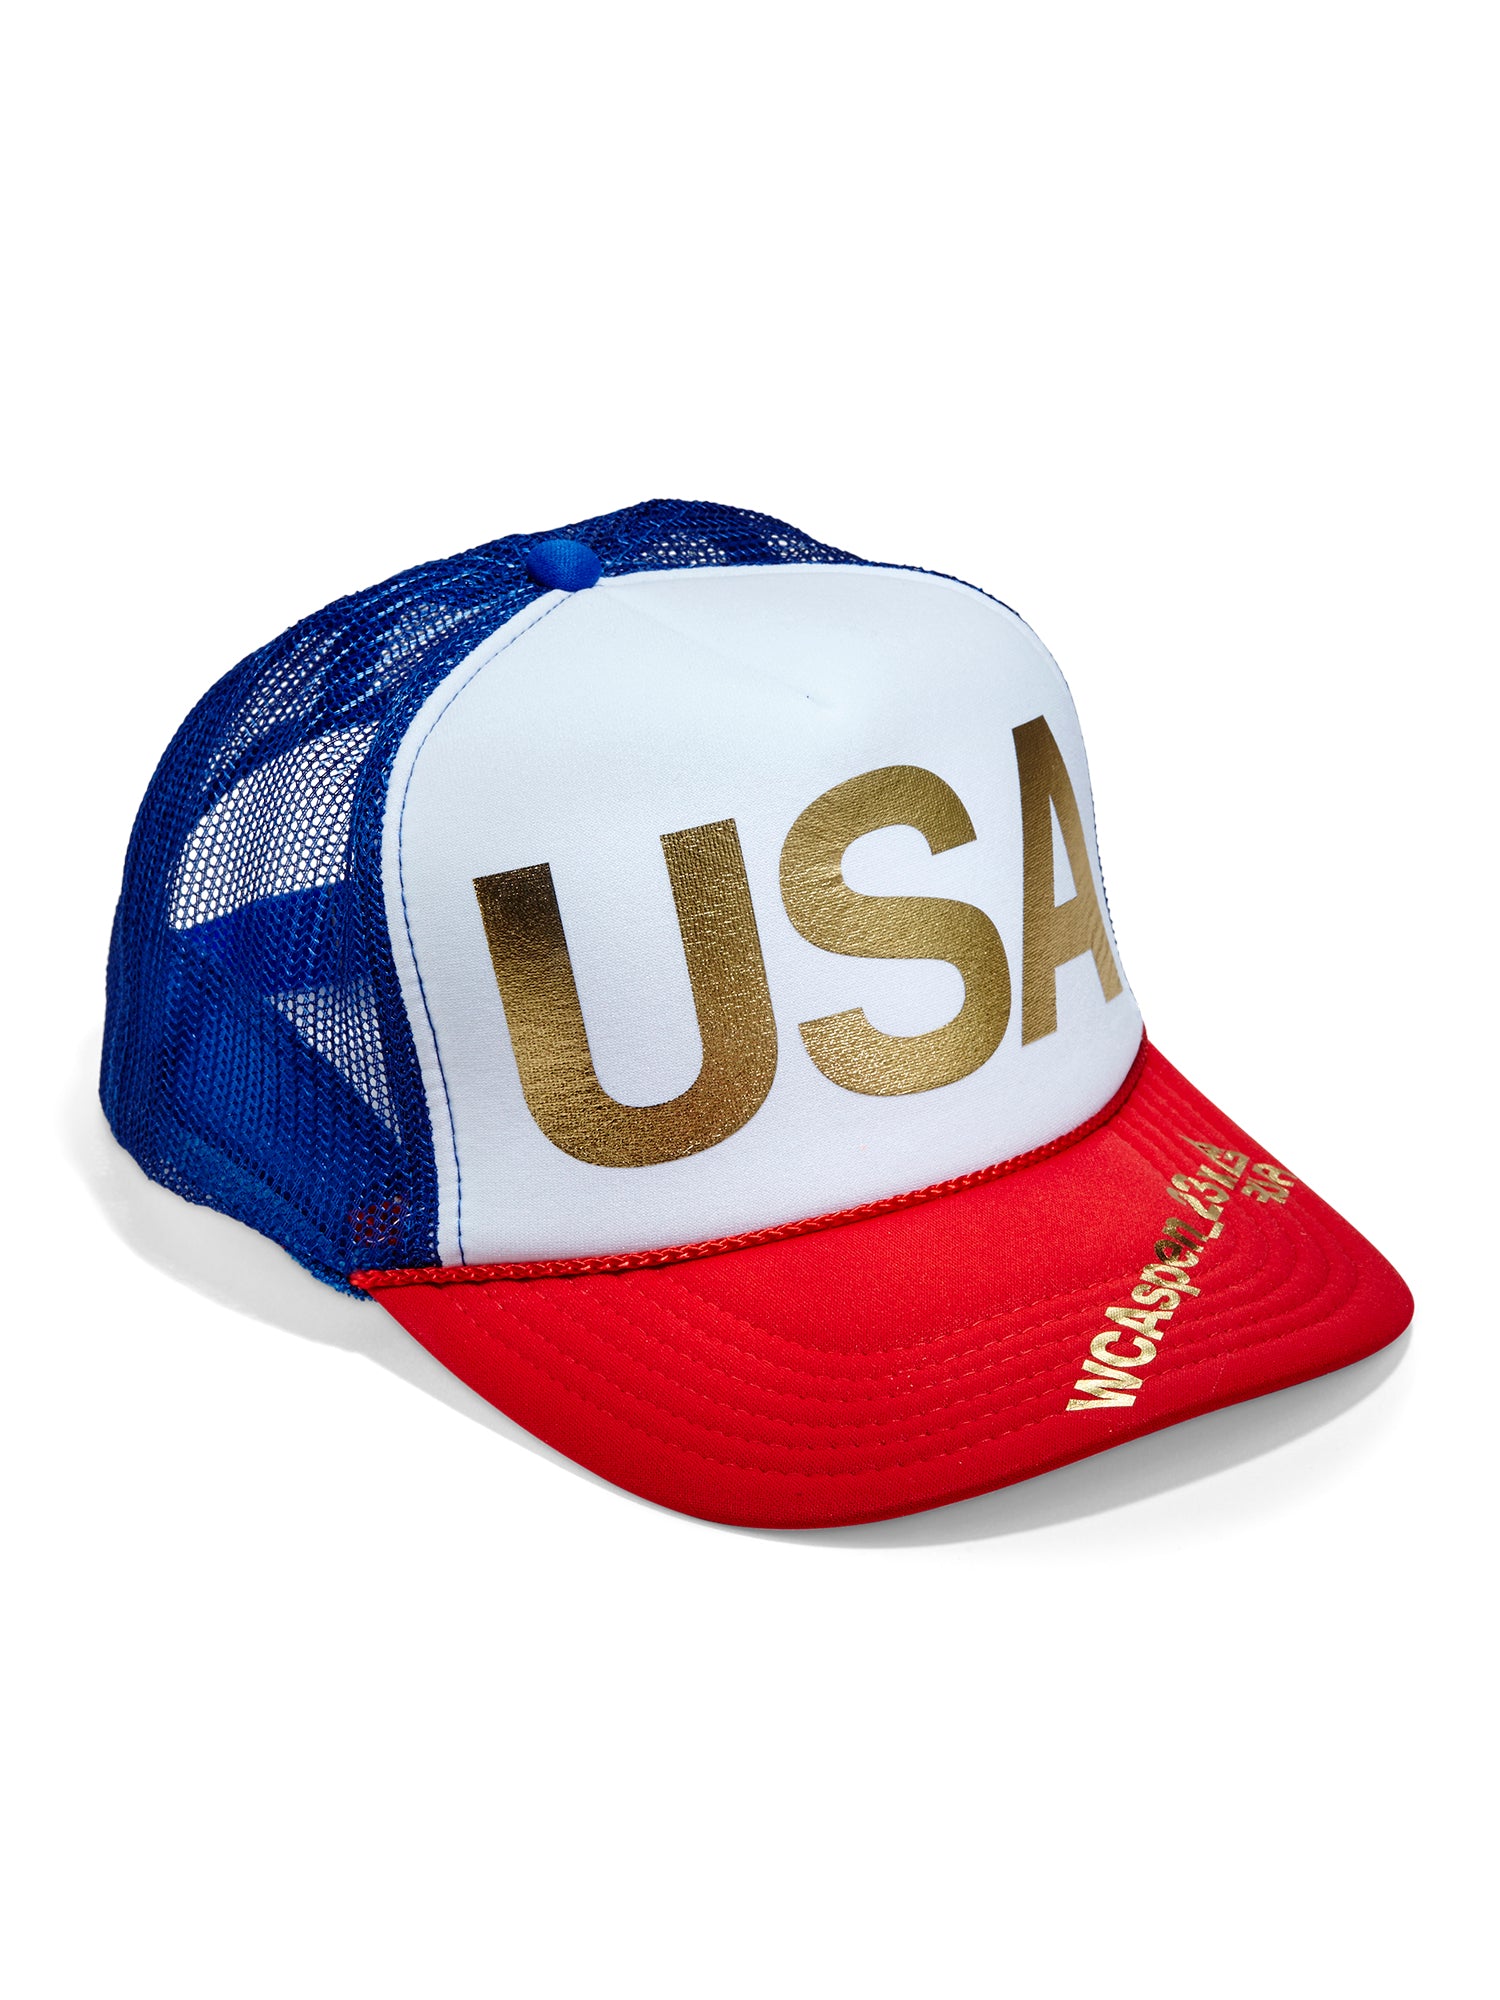 RED WHITE BLUE GOLD